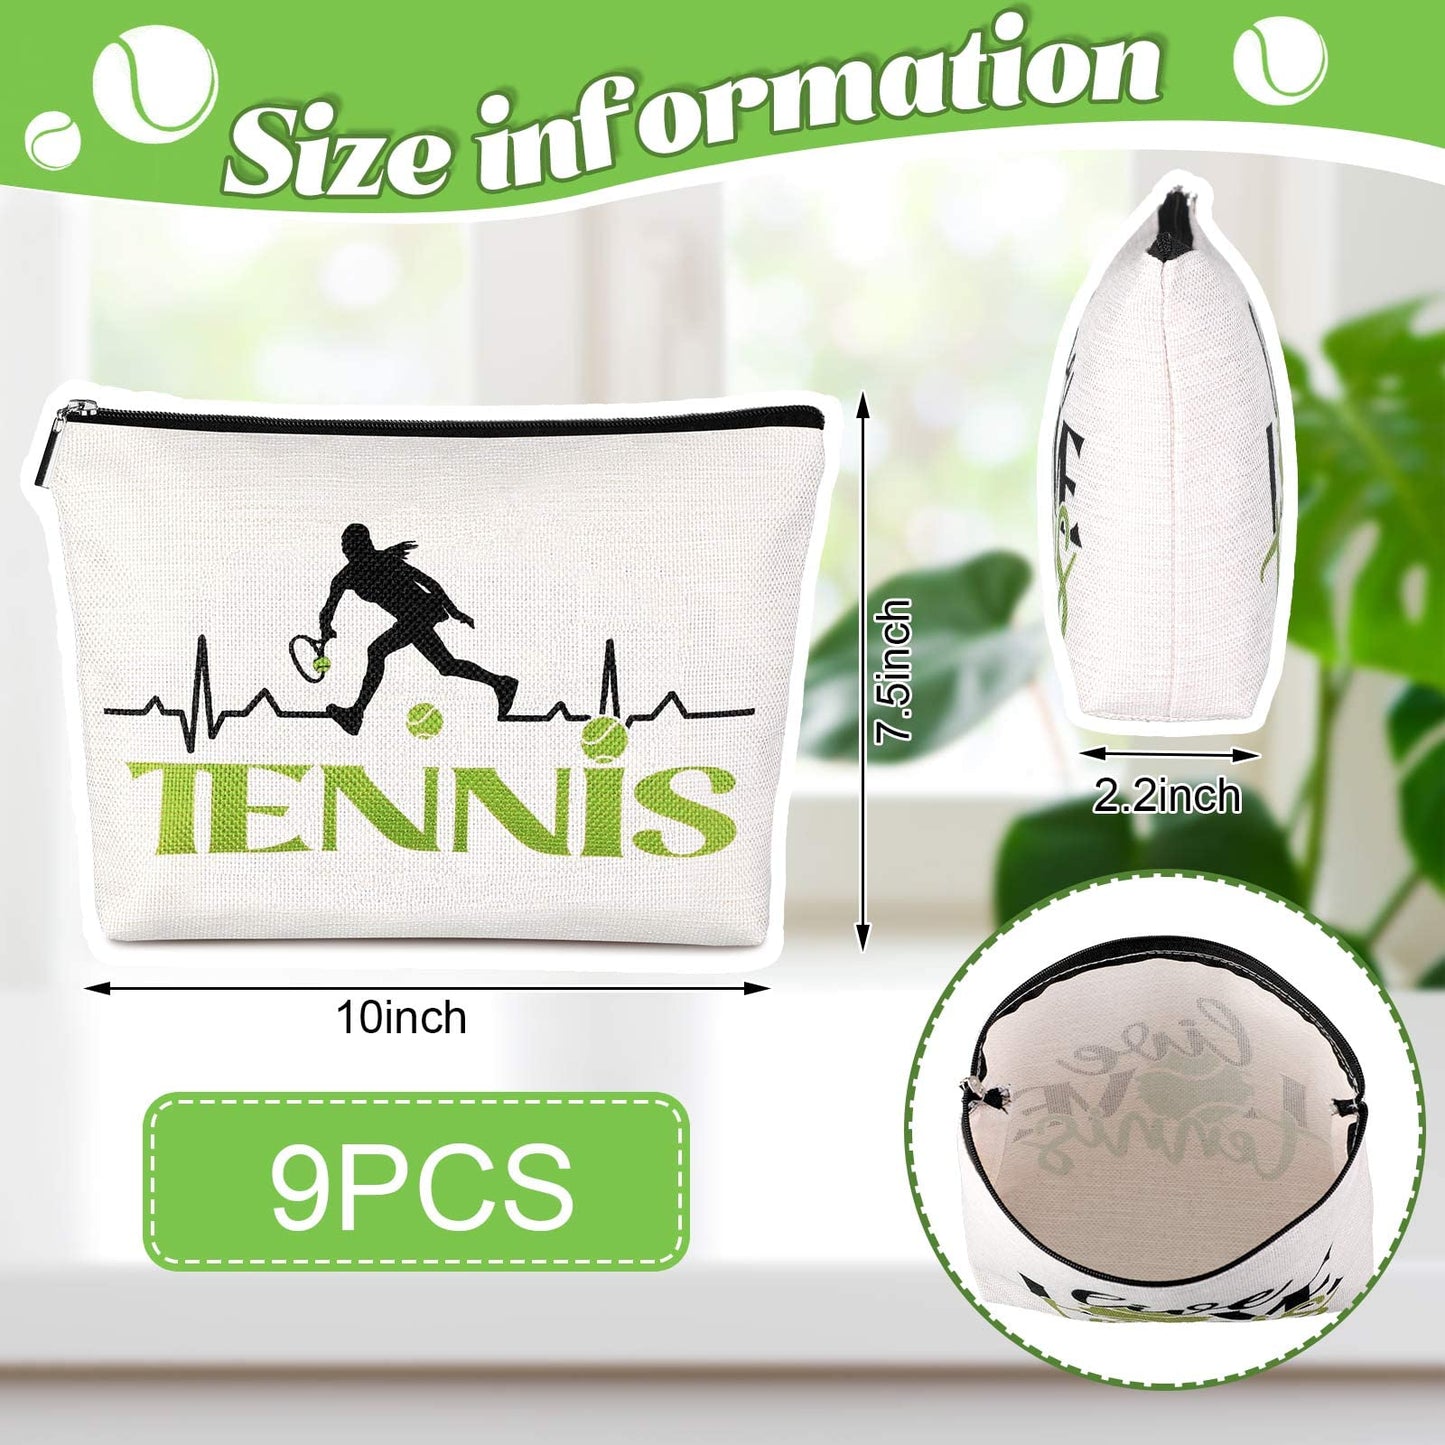 Pinkunn 9 Pieces Tennis Gifts for Women Tennis Makeup Bag Tennis Accessories Pouch Bag for Girls Tennis Travel Zipper Cosmetic Bags for Tennis Lover Player Team Novelty Graduation Birthday Xmas Gift